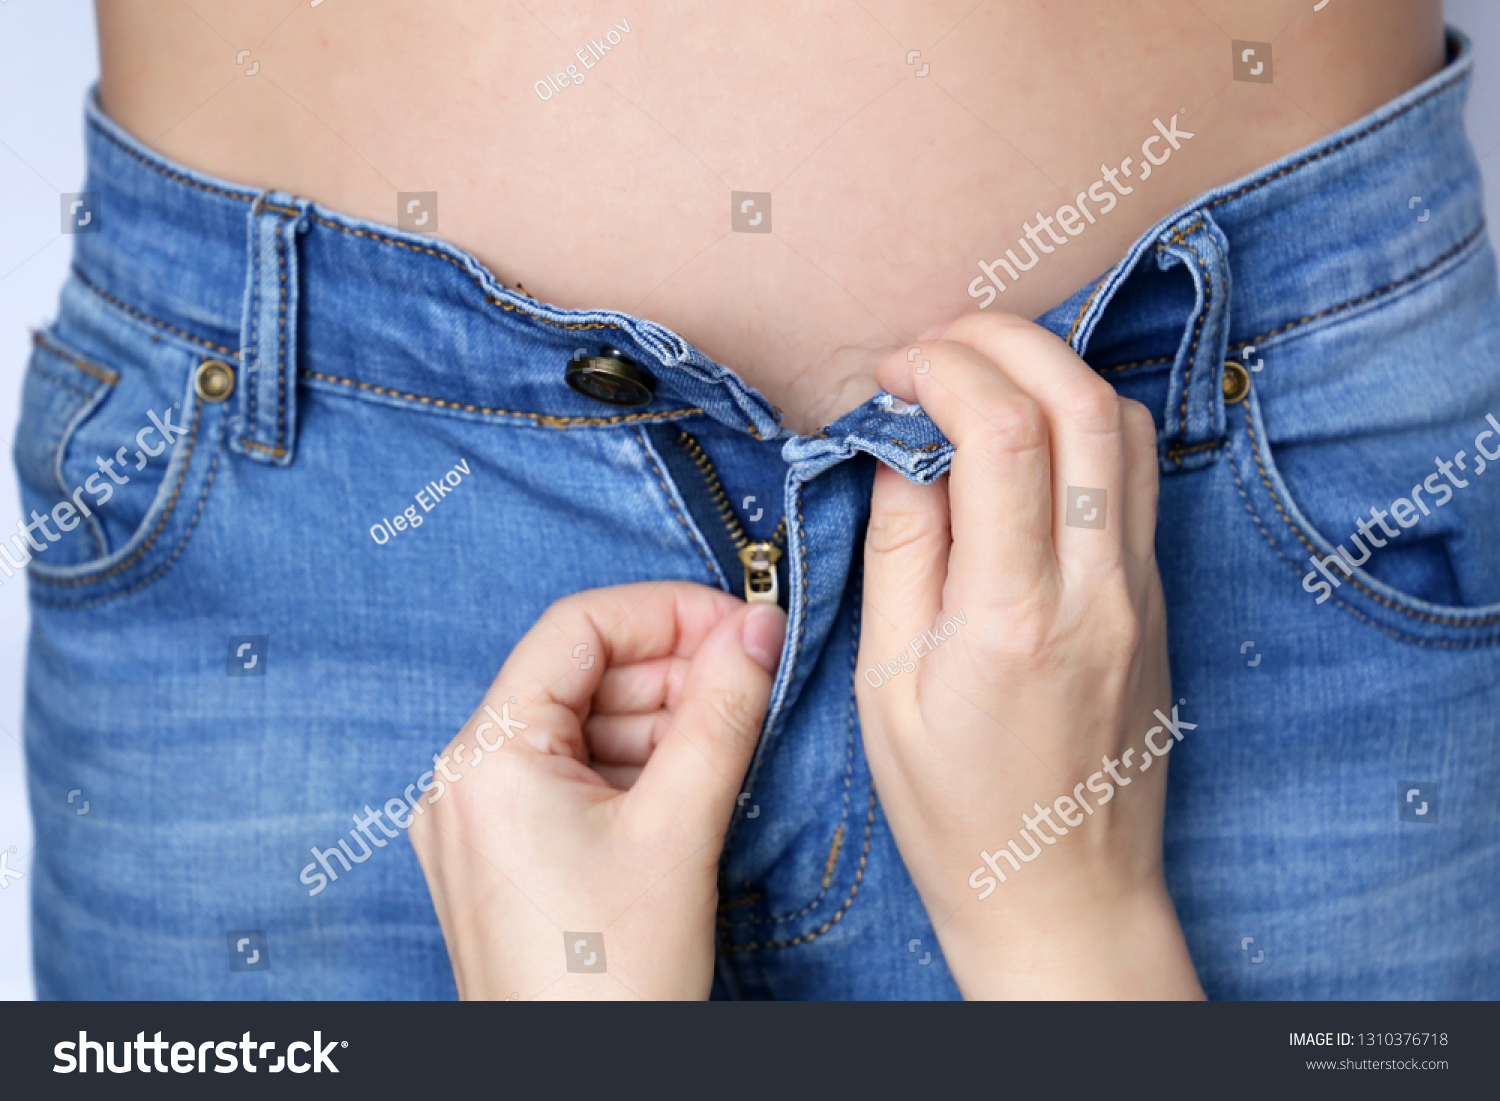 Sex In Jeans Pics